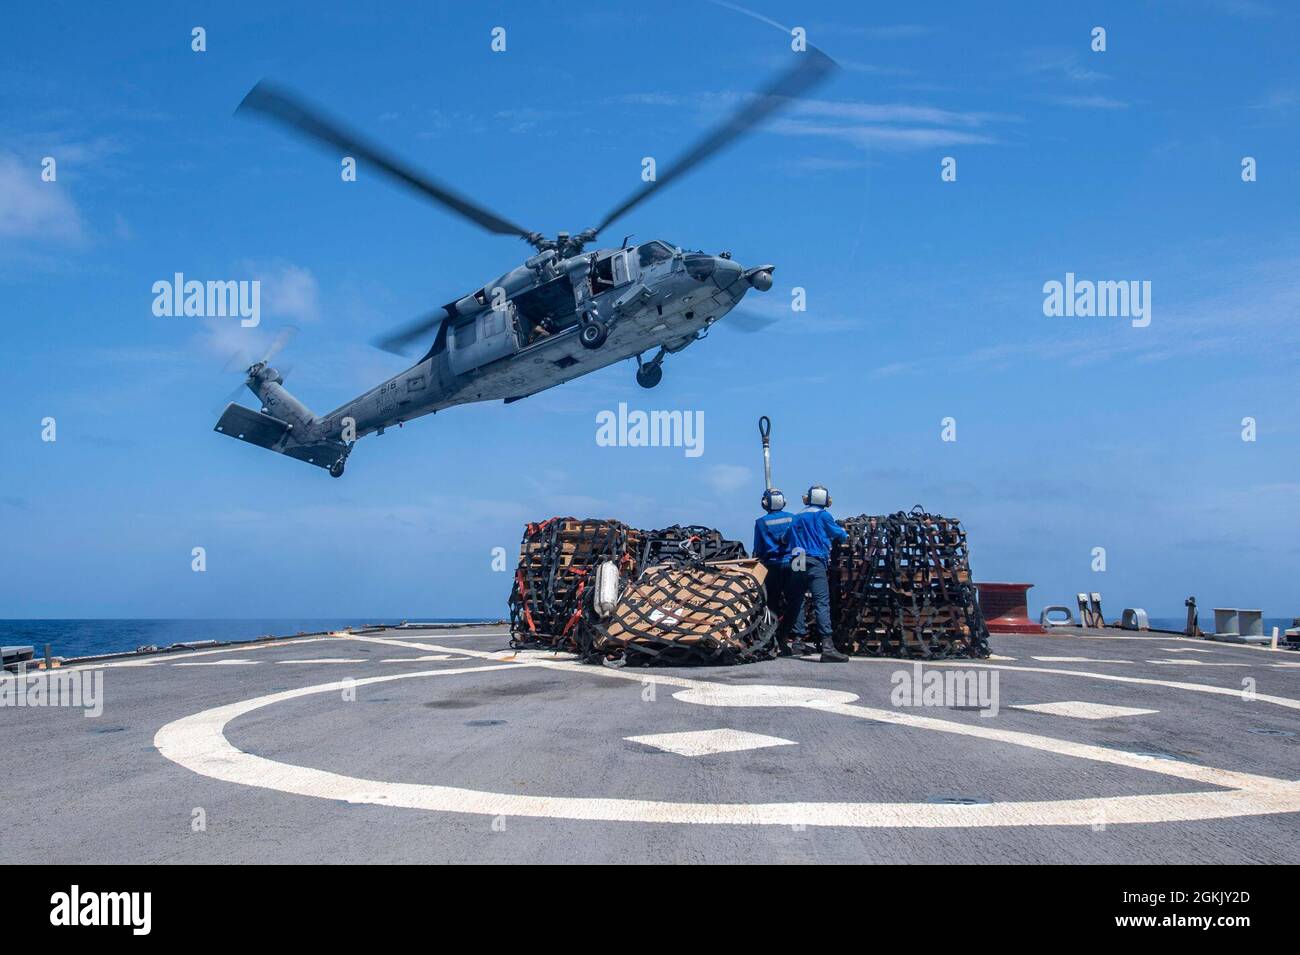 ARABIAN SEA (May 8, 2021) – Boatswain’s Mate 3rd Class Nathaniel Yost, left, and Gas Turbine System Technician (Mechanical) 3rd Class Jason Bird, both assigned to guided-missile destroyer USS Laboon (DDG 58), prepare to attach cargo to a MH-60S Sea Hawk helicopter, attached to the “Dusty Dogs” of Helicopter Sea Combat Squadron 7, during a vertical replenishment-at-sea in the Arabian Sea, May 8. Laboon is operating with the IKE Carrier Strike Group while deployed to the U.S. 5th Fleet area of operations in support of naval operations and providing air power to protect U.S. and coalition forces Stock Photo